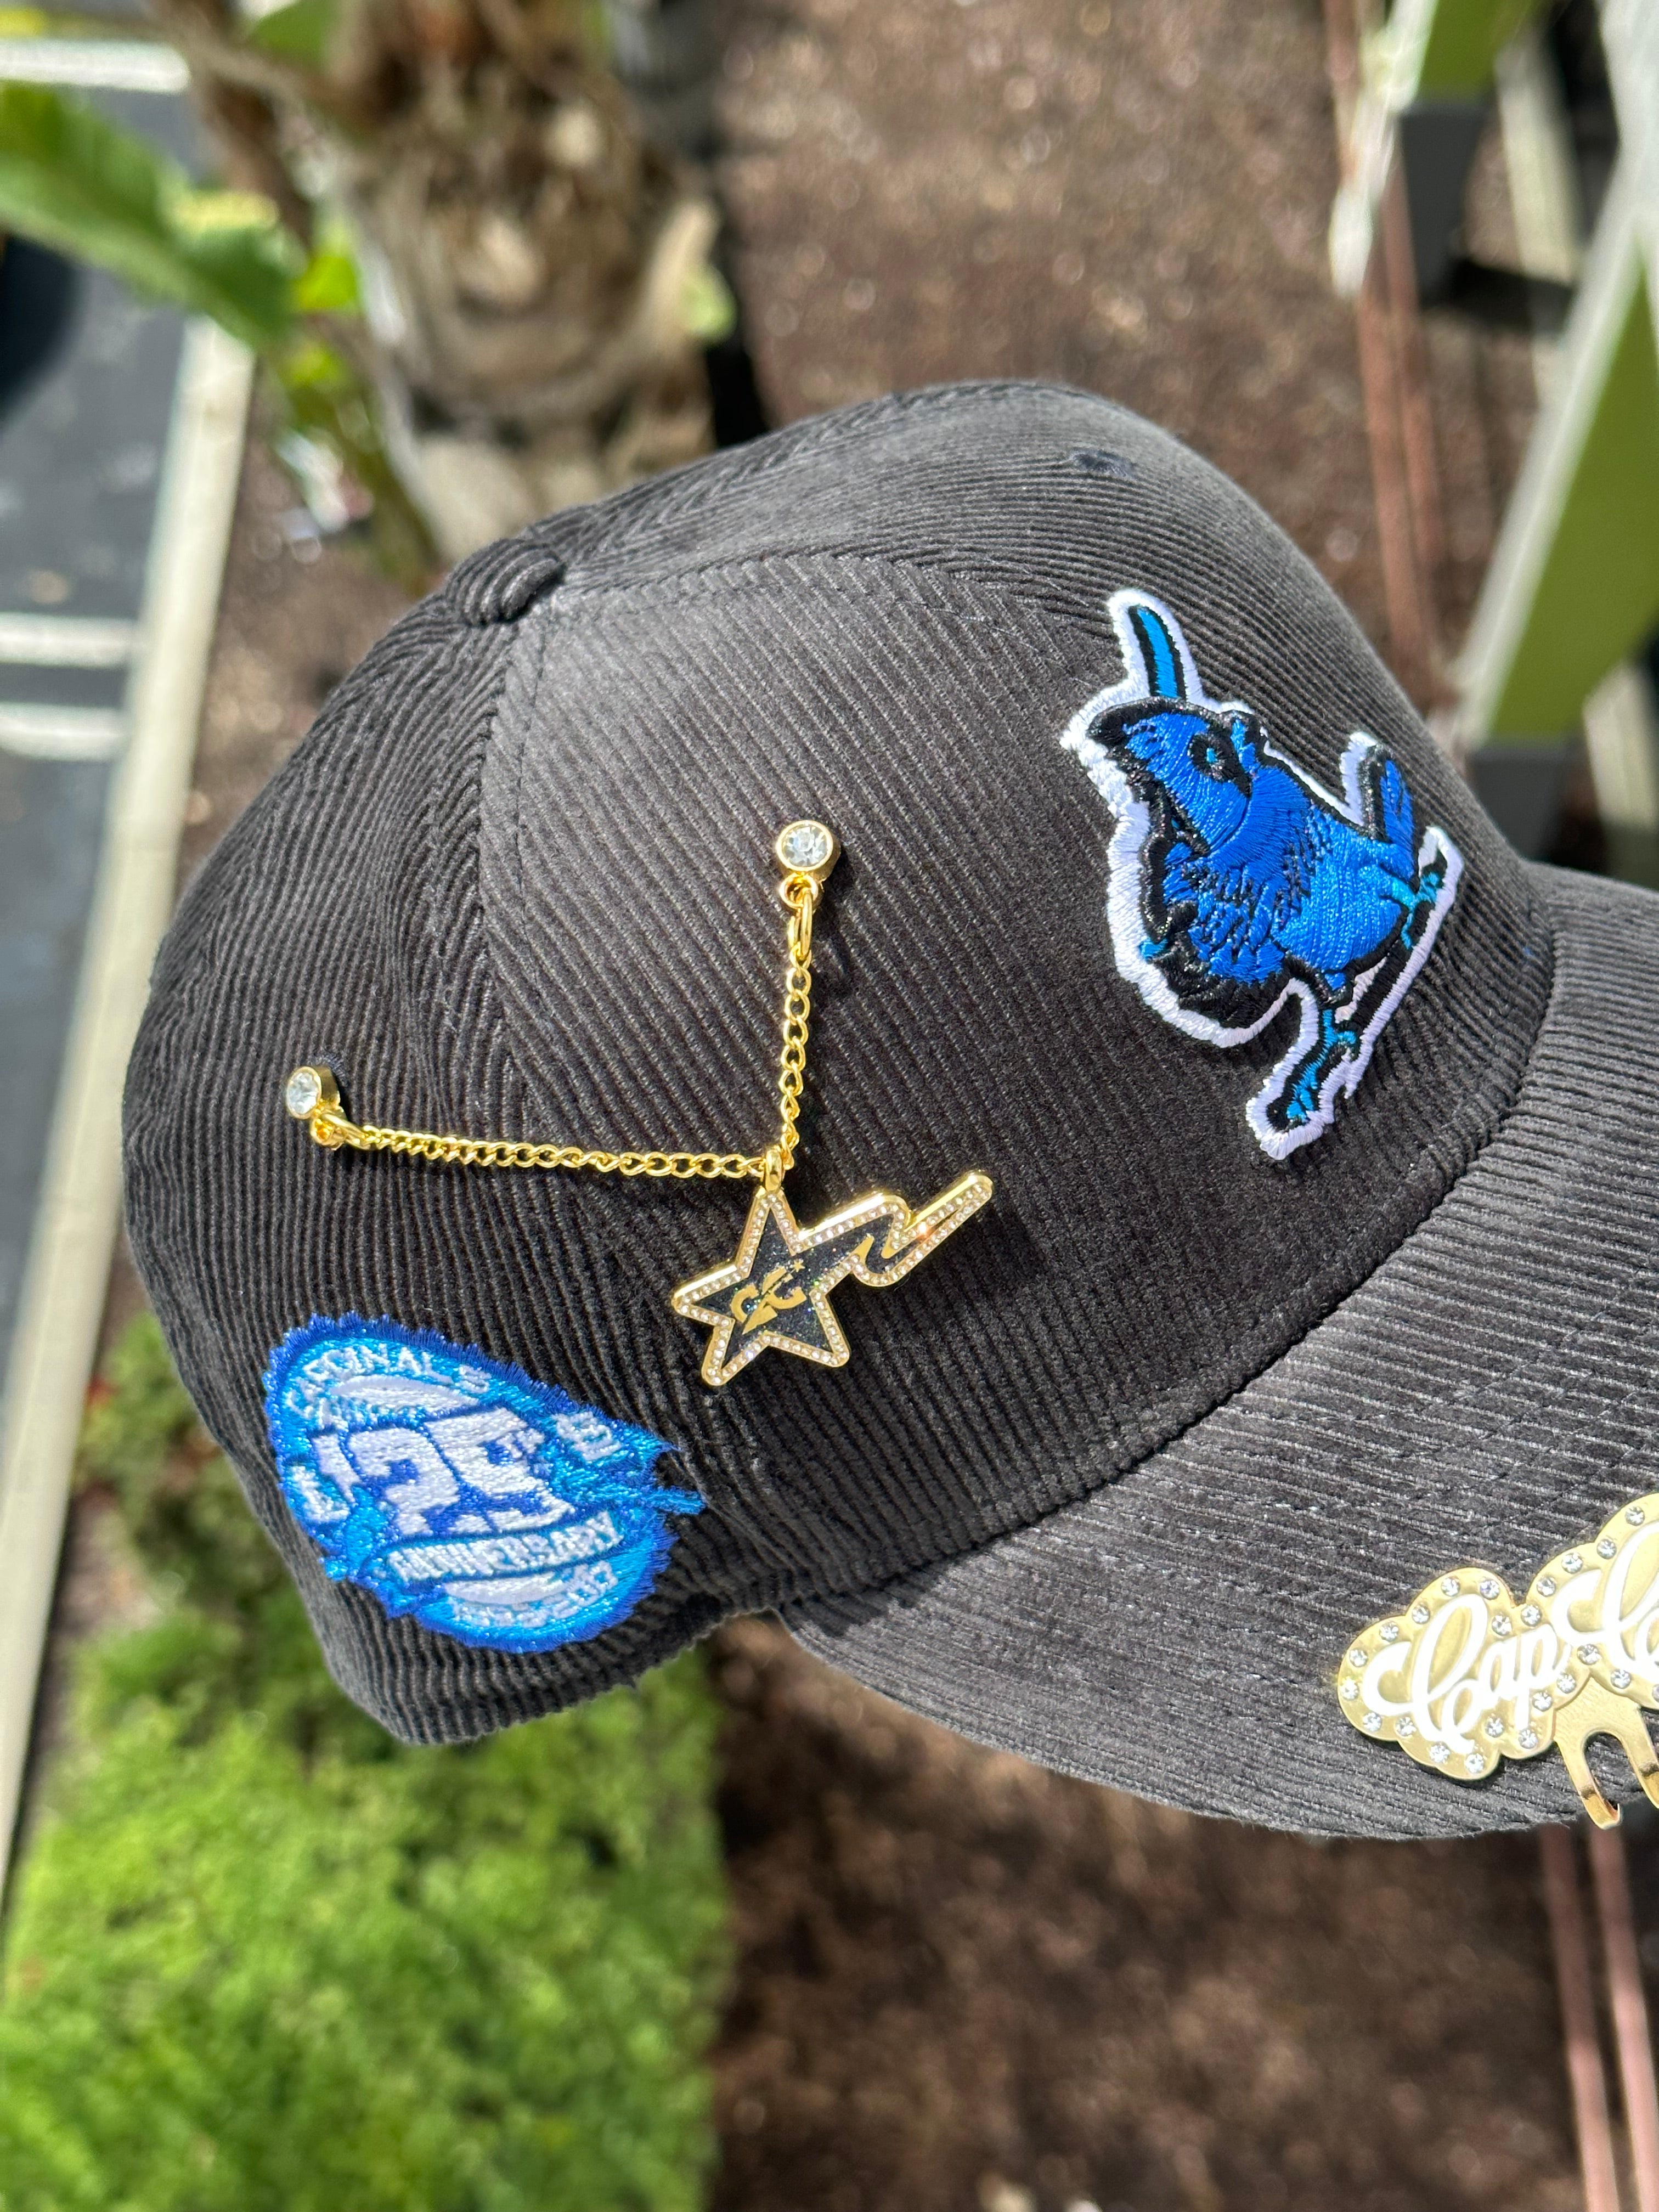 NEW ERA EXCLUSIVE 59FIFTY CORDUROY ST LOUIS CARDINALS W/ 125TH ANNIVERSARY PATCH (BLUE UV) VERY LIMITED *BLIP NOT INCLUDED